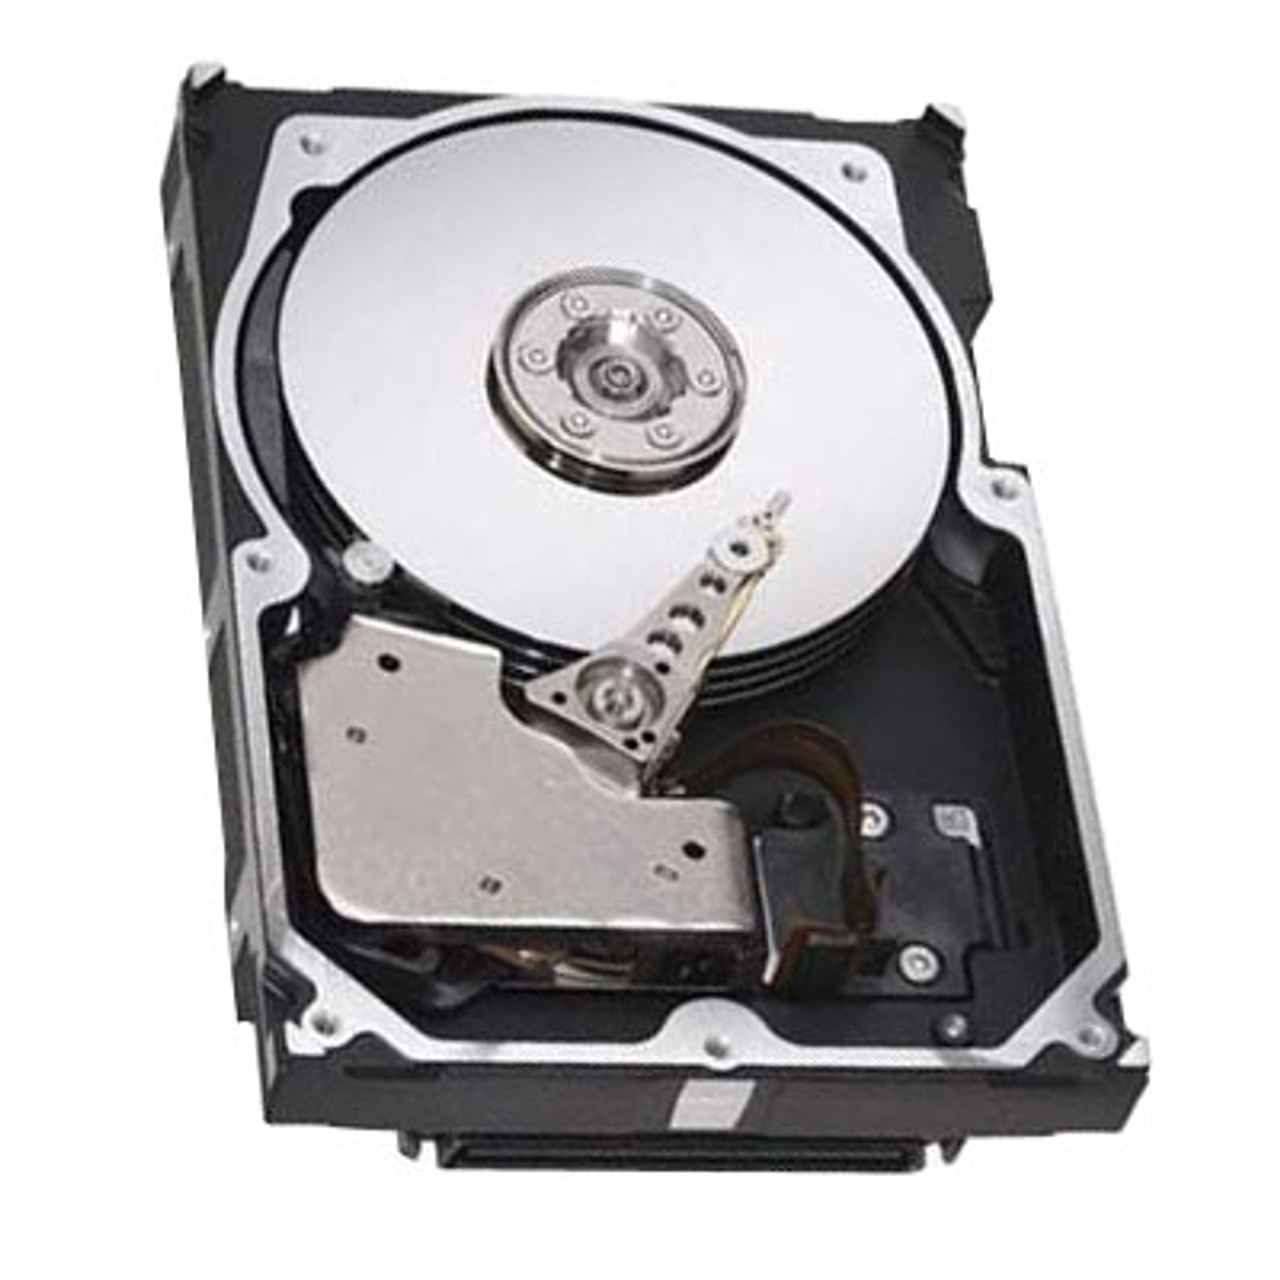 118-032-506 EMC 300GB 10000RPM Fibre Channel 2Gbps 16MB Cache 3.5-Inch Internal Hard Drive with Tray